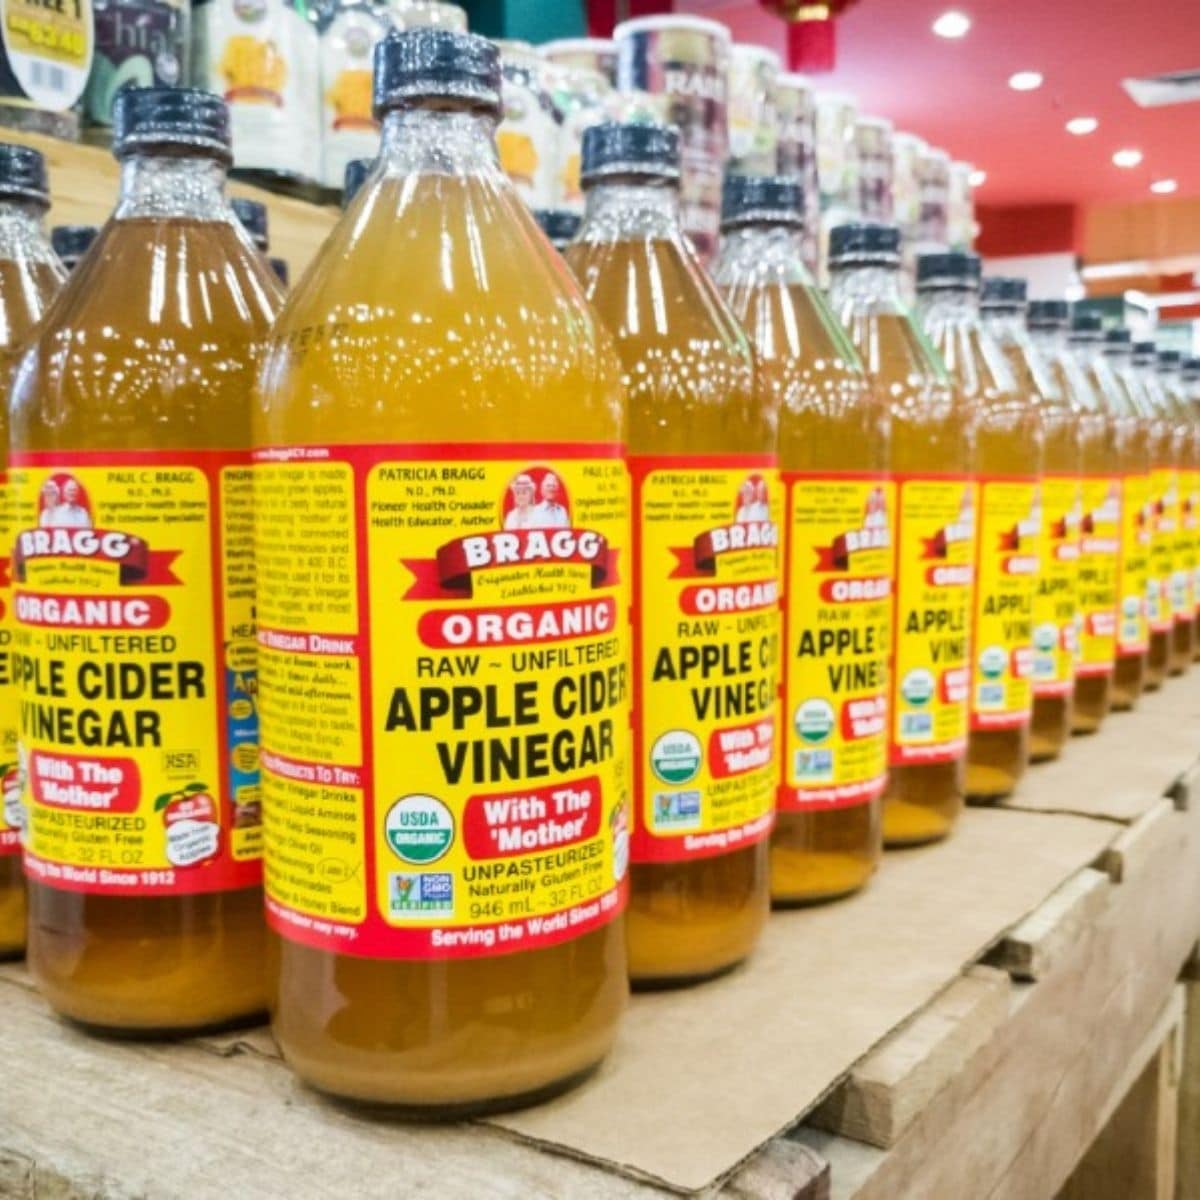 Apple cider vinegar in a grocery store.